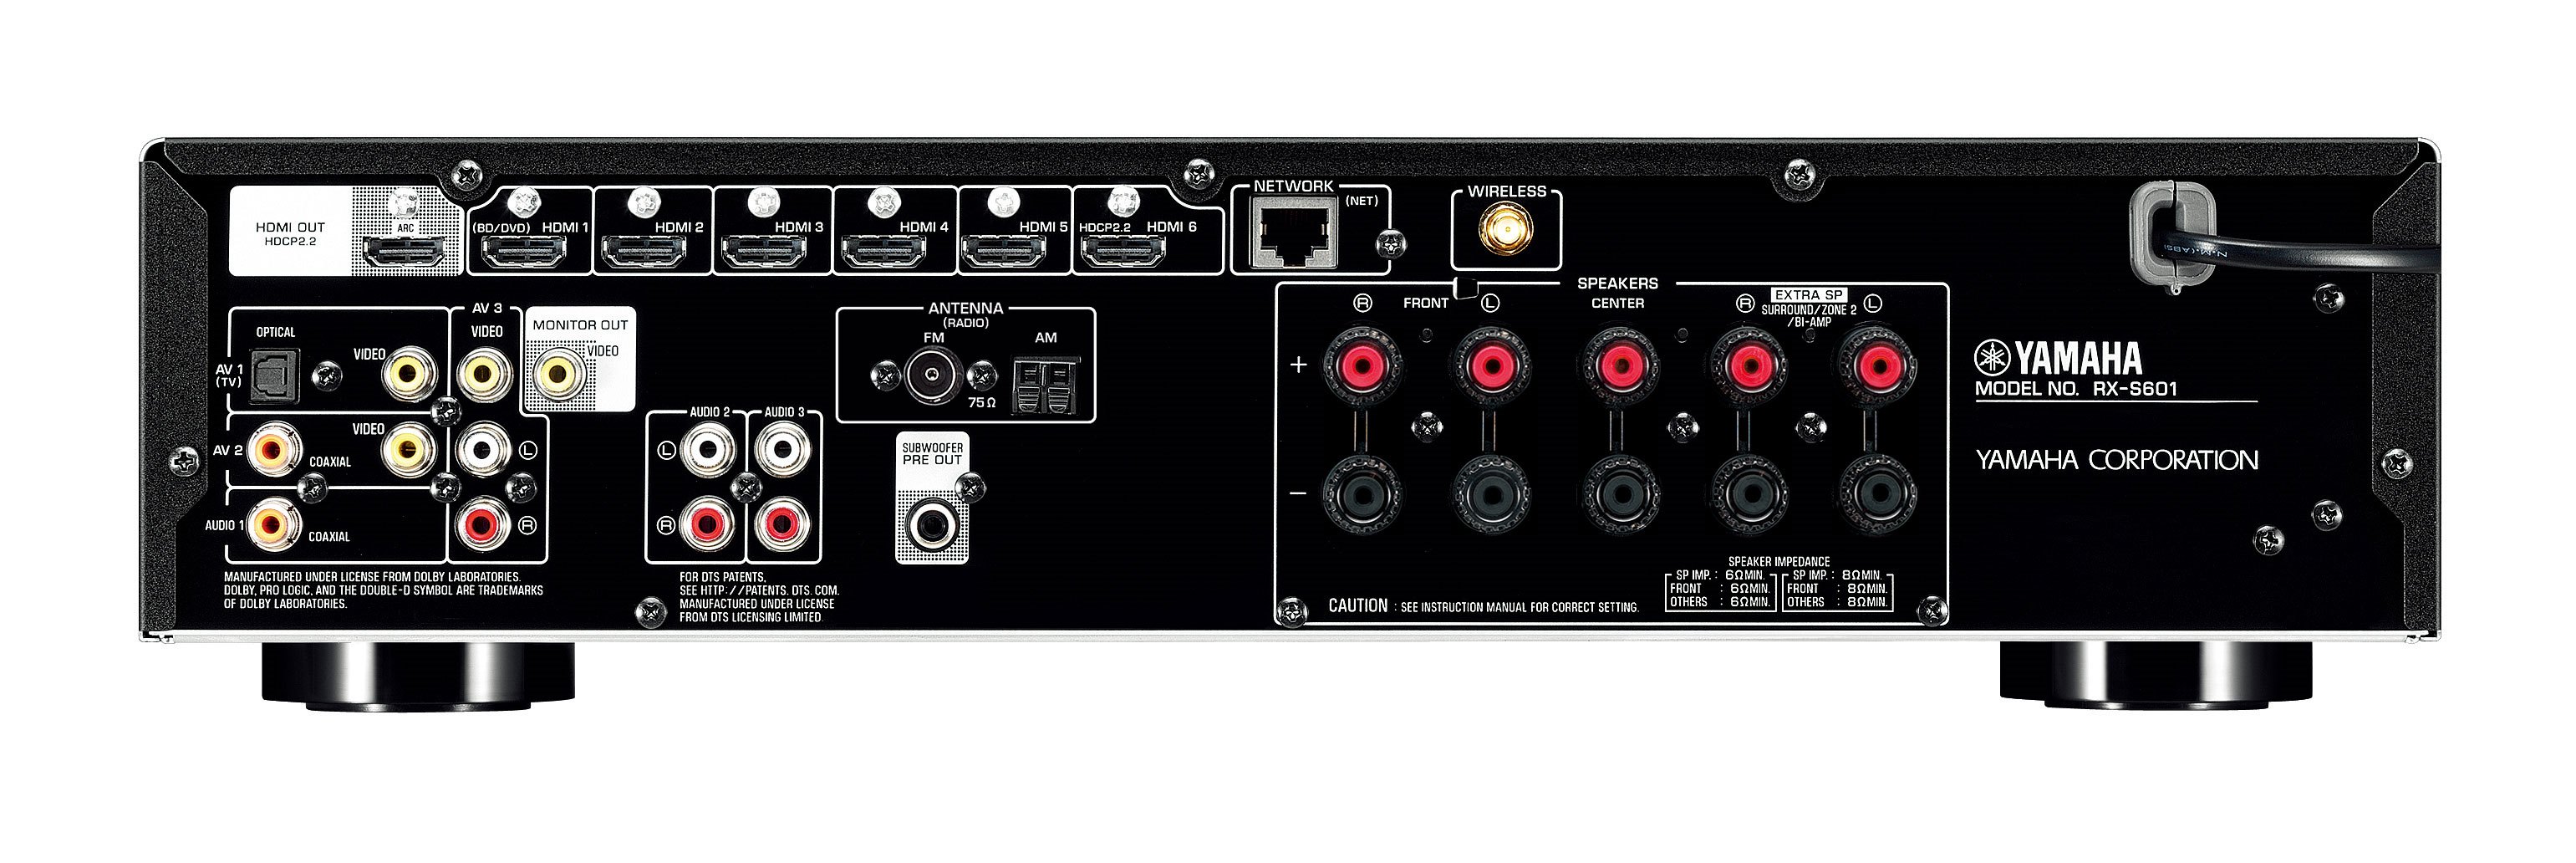 RX-S600 - Overview - AV Receivers - Audio & Visual - Products